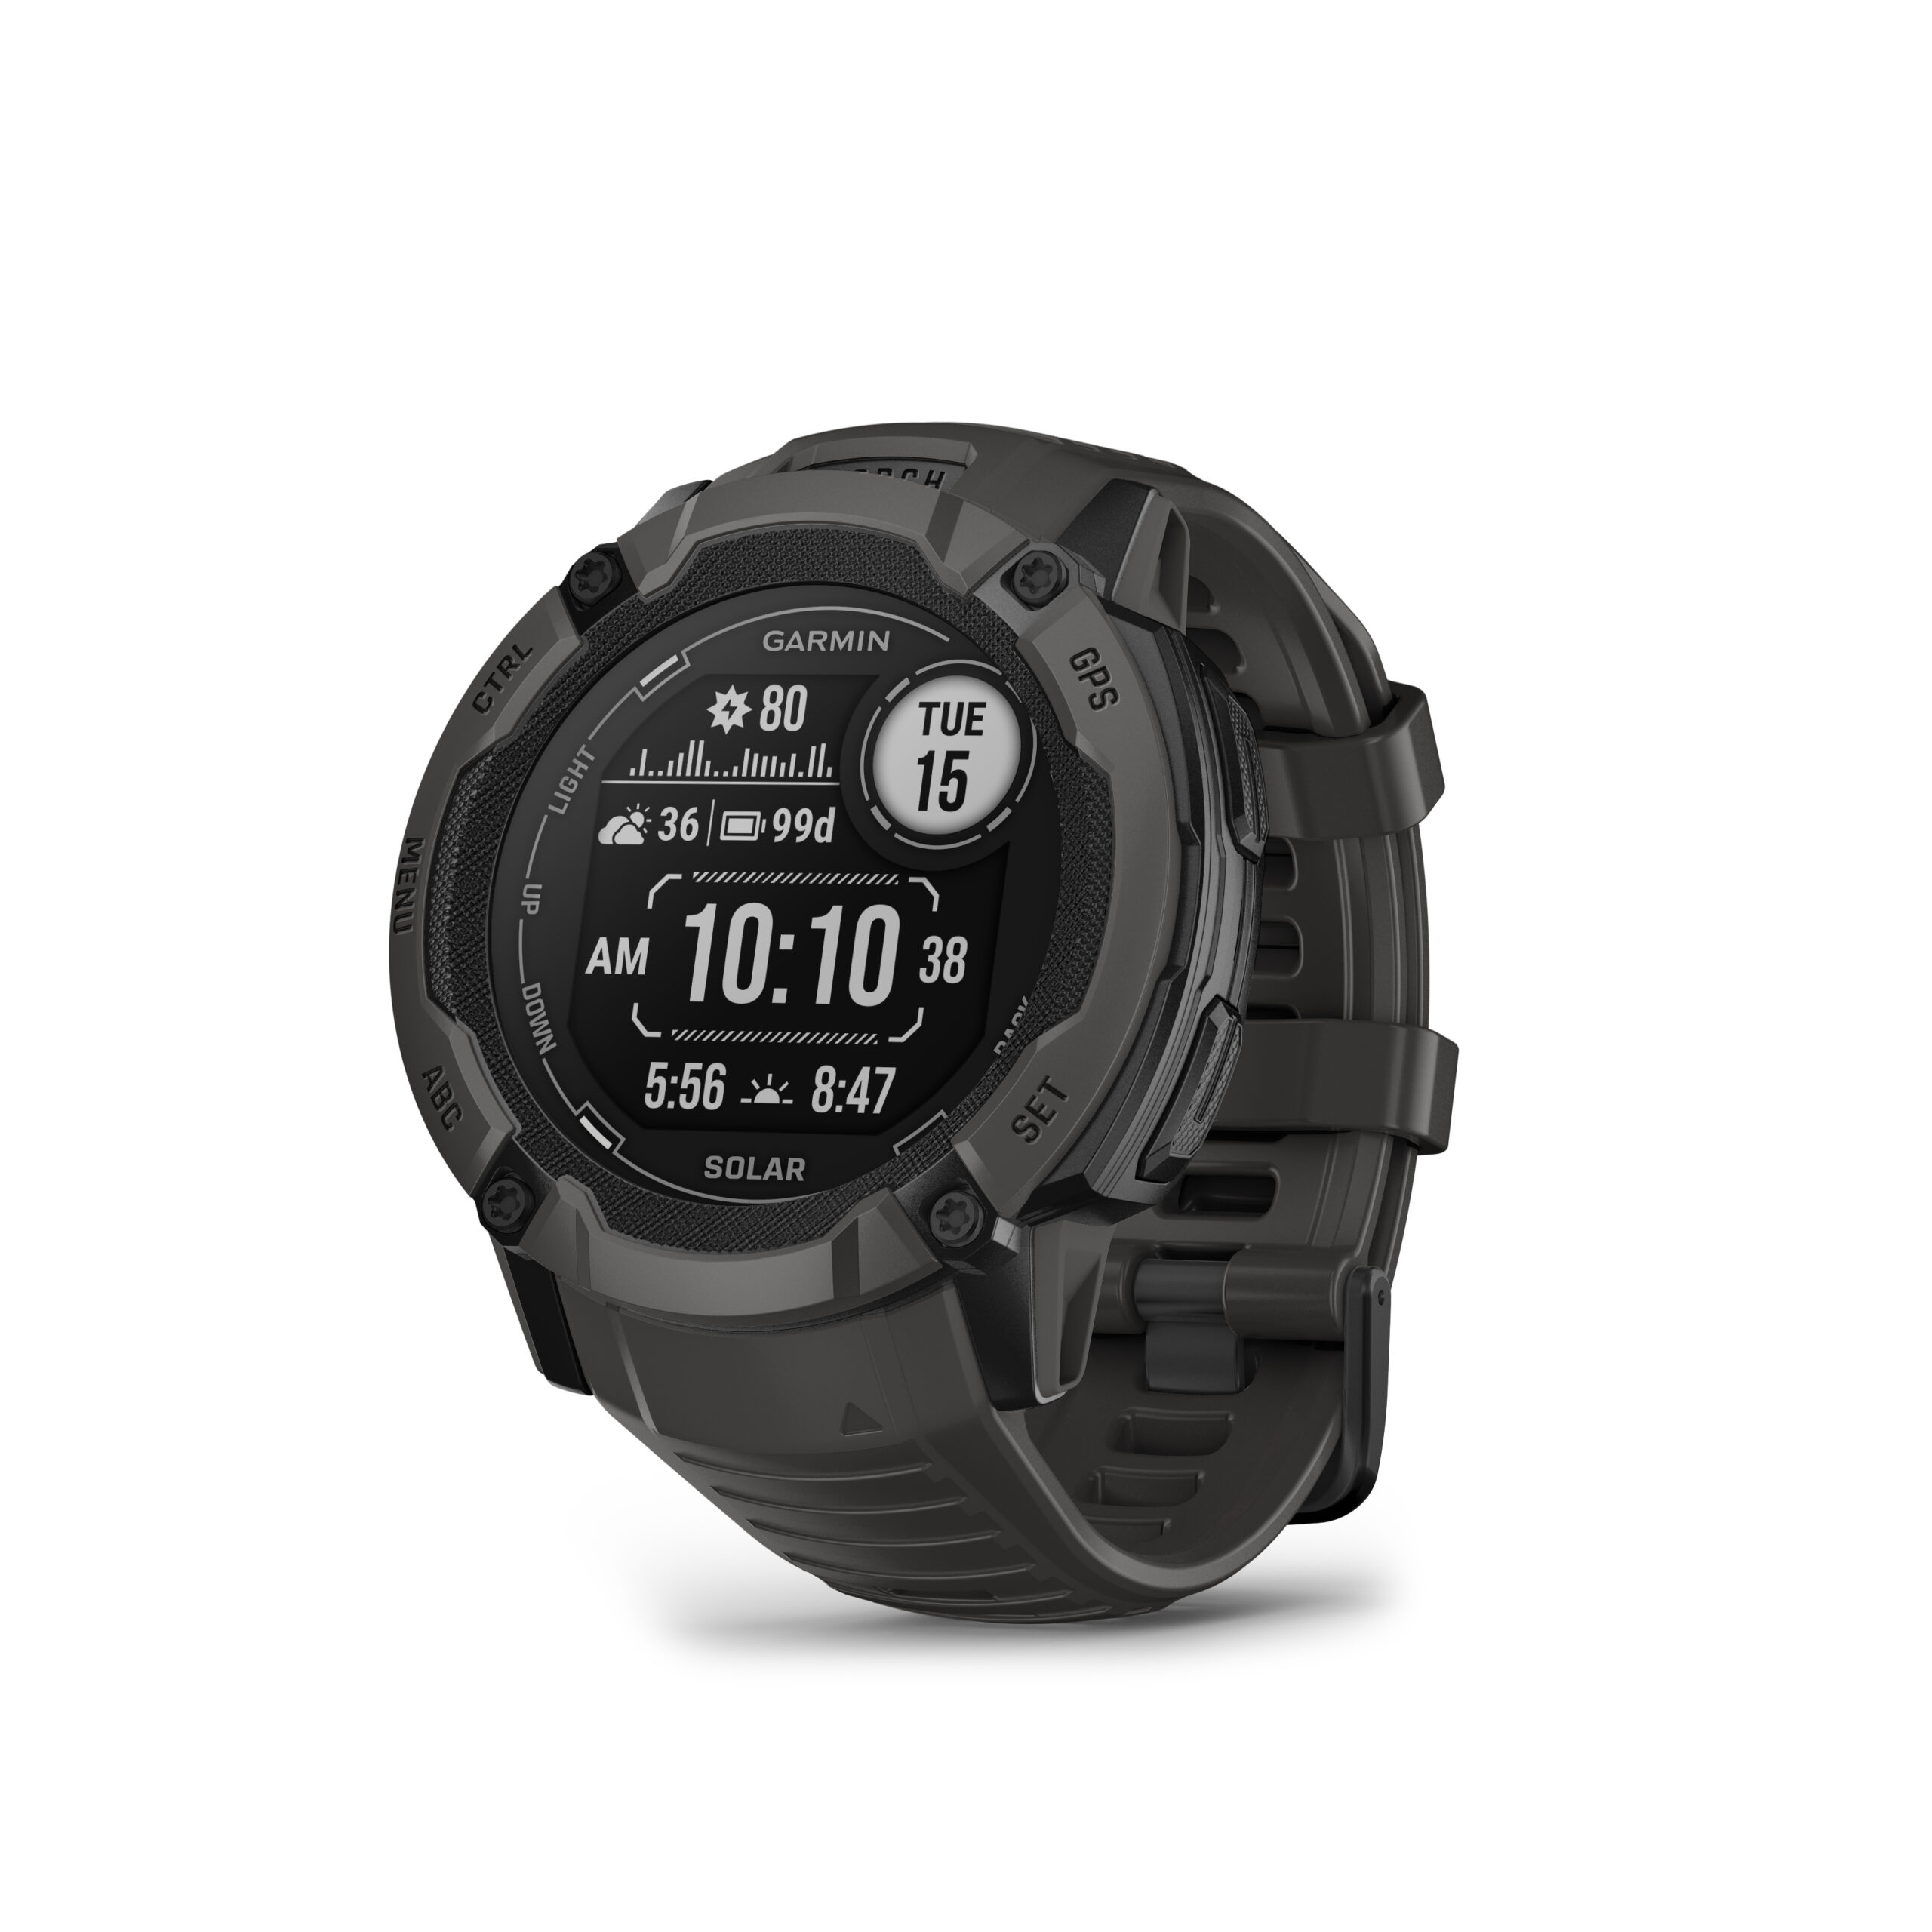 Best Garmin deals for July 2023: Forerunner 245 Music smartwatch for 38%  off, DriveSmart 65 GPS for 26% off, HRM-Pro heart rate strap for 25% off,  and more deals.